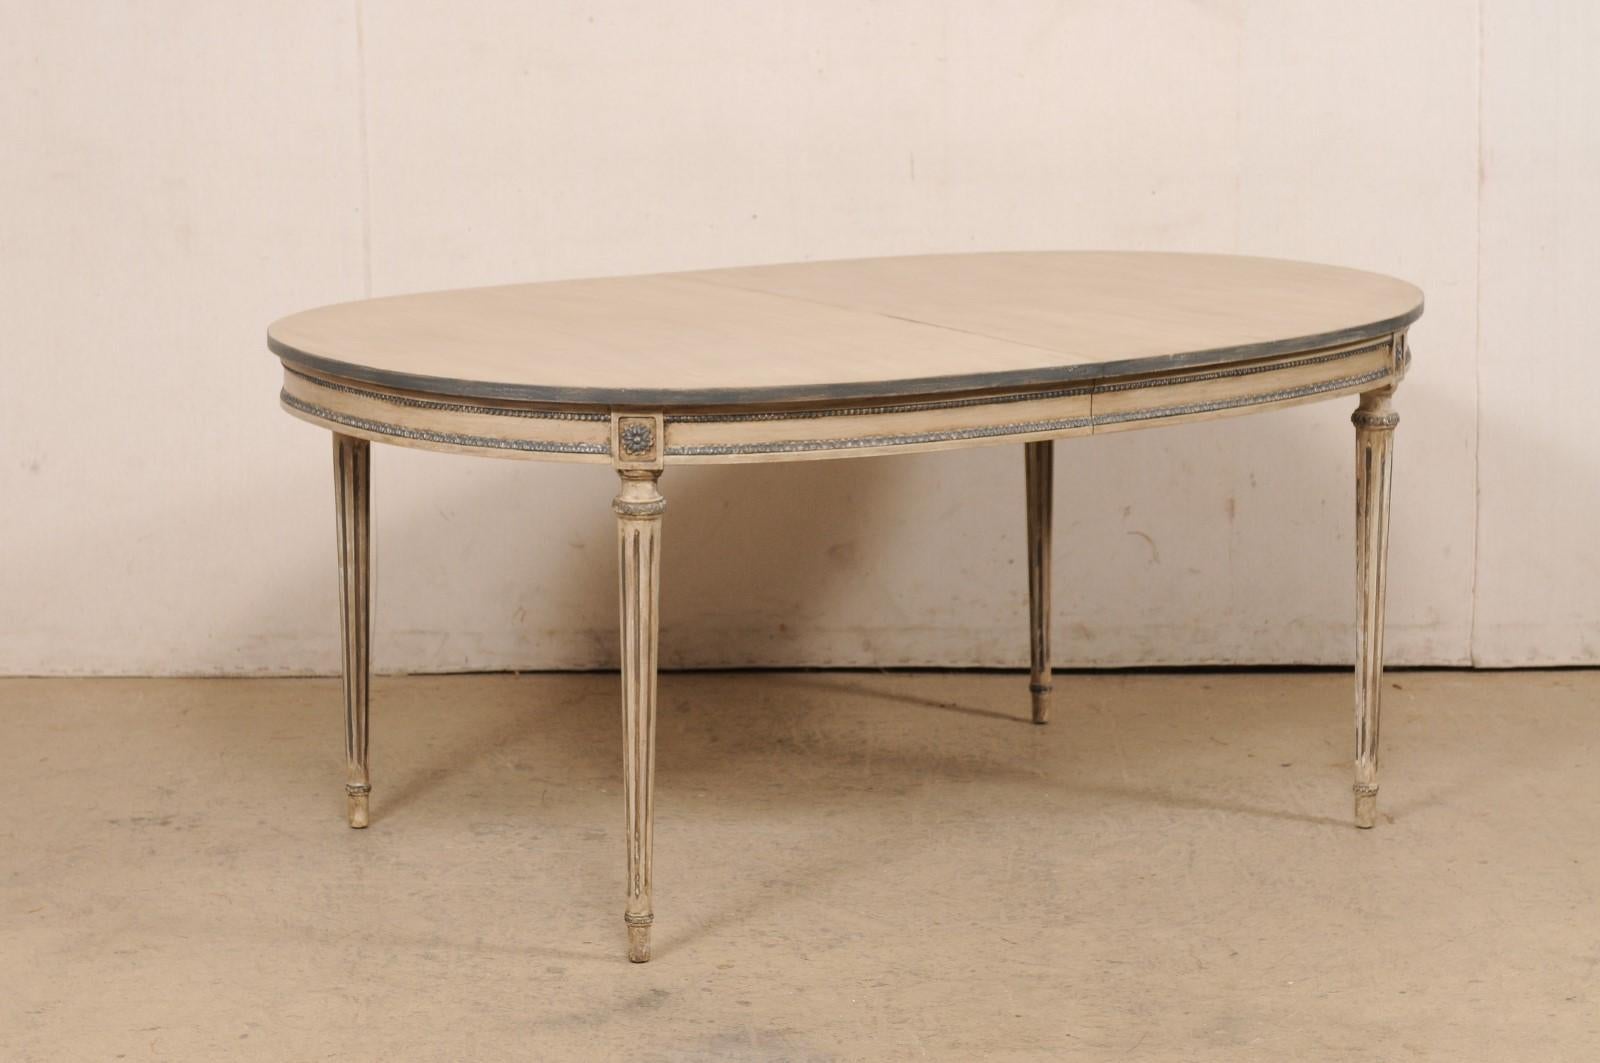 An American oval shaped carved and painted wood dining table from the late 20th century. This vintage table from American furniture makers Kindel Furniture (Grand Rapids, MI) is oval-shaped and has been designed with French inspiration with the